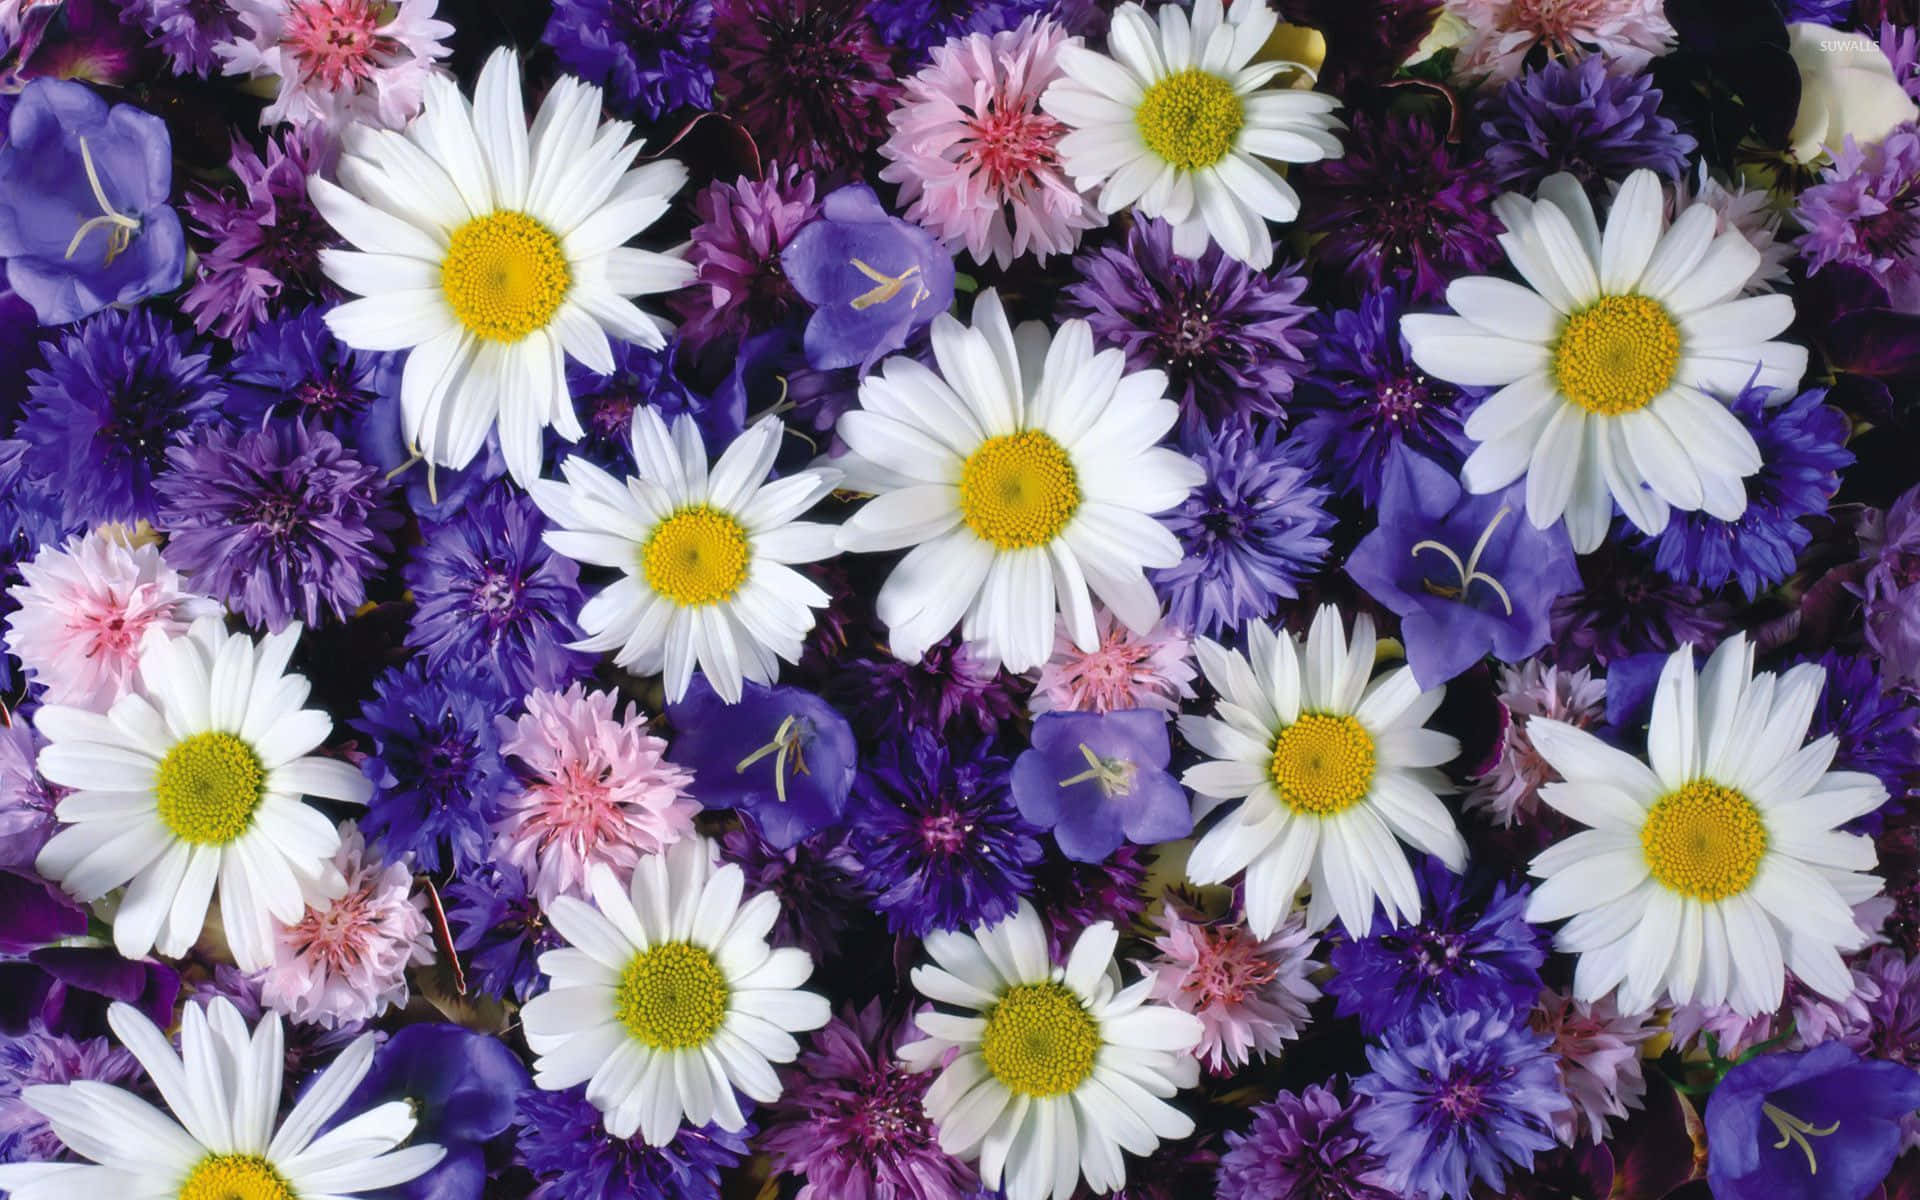 "Bringing a pop of color to any space with these vibrant daisies!" Wallpaper